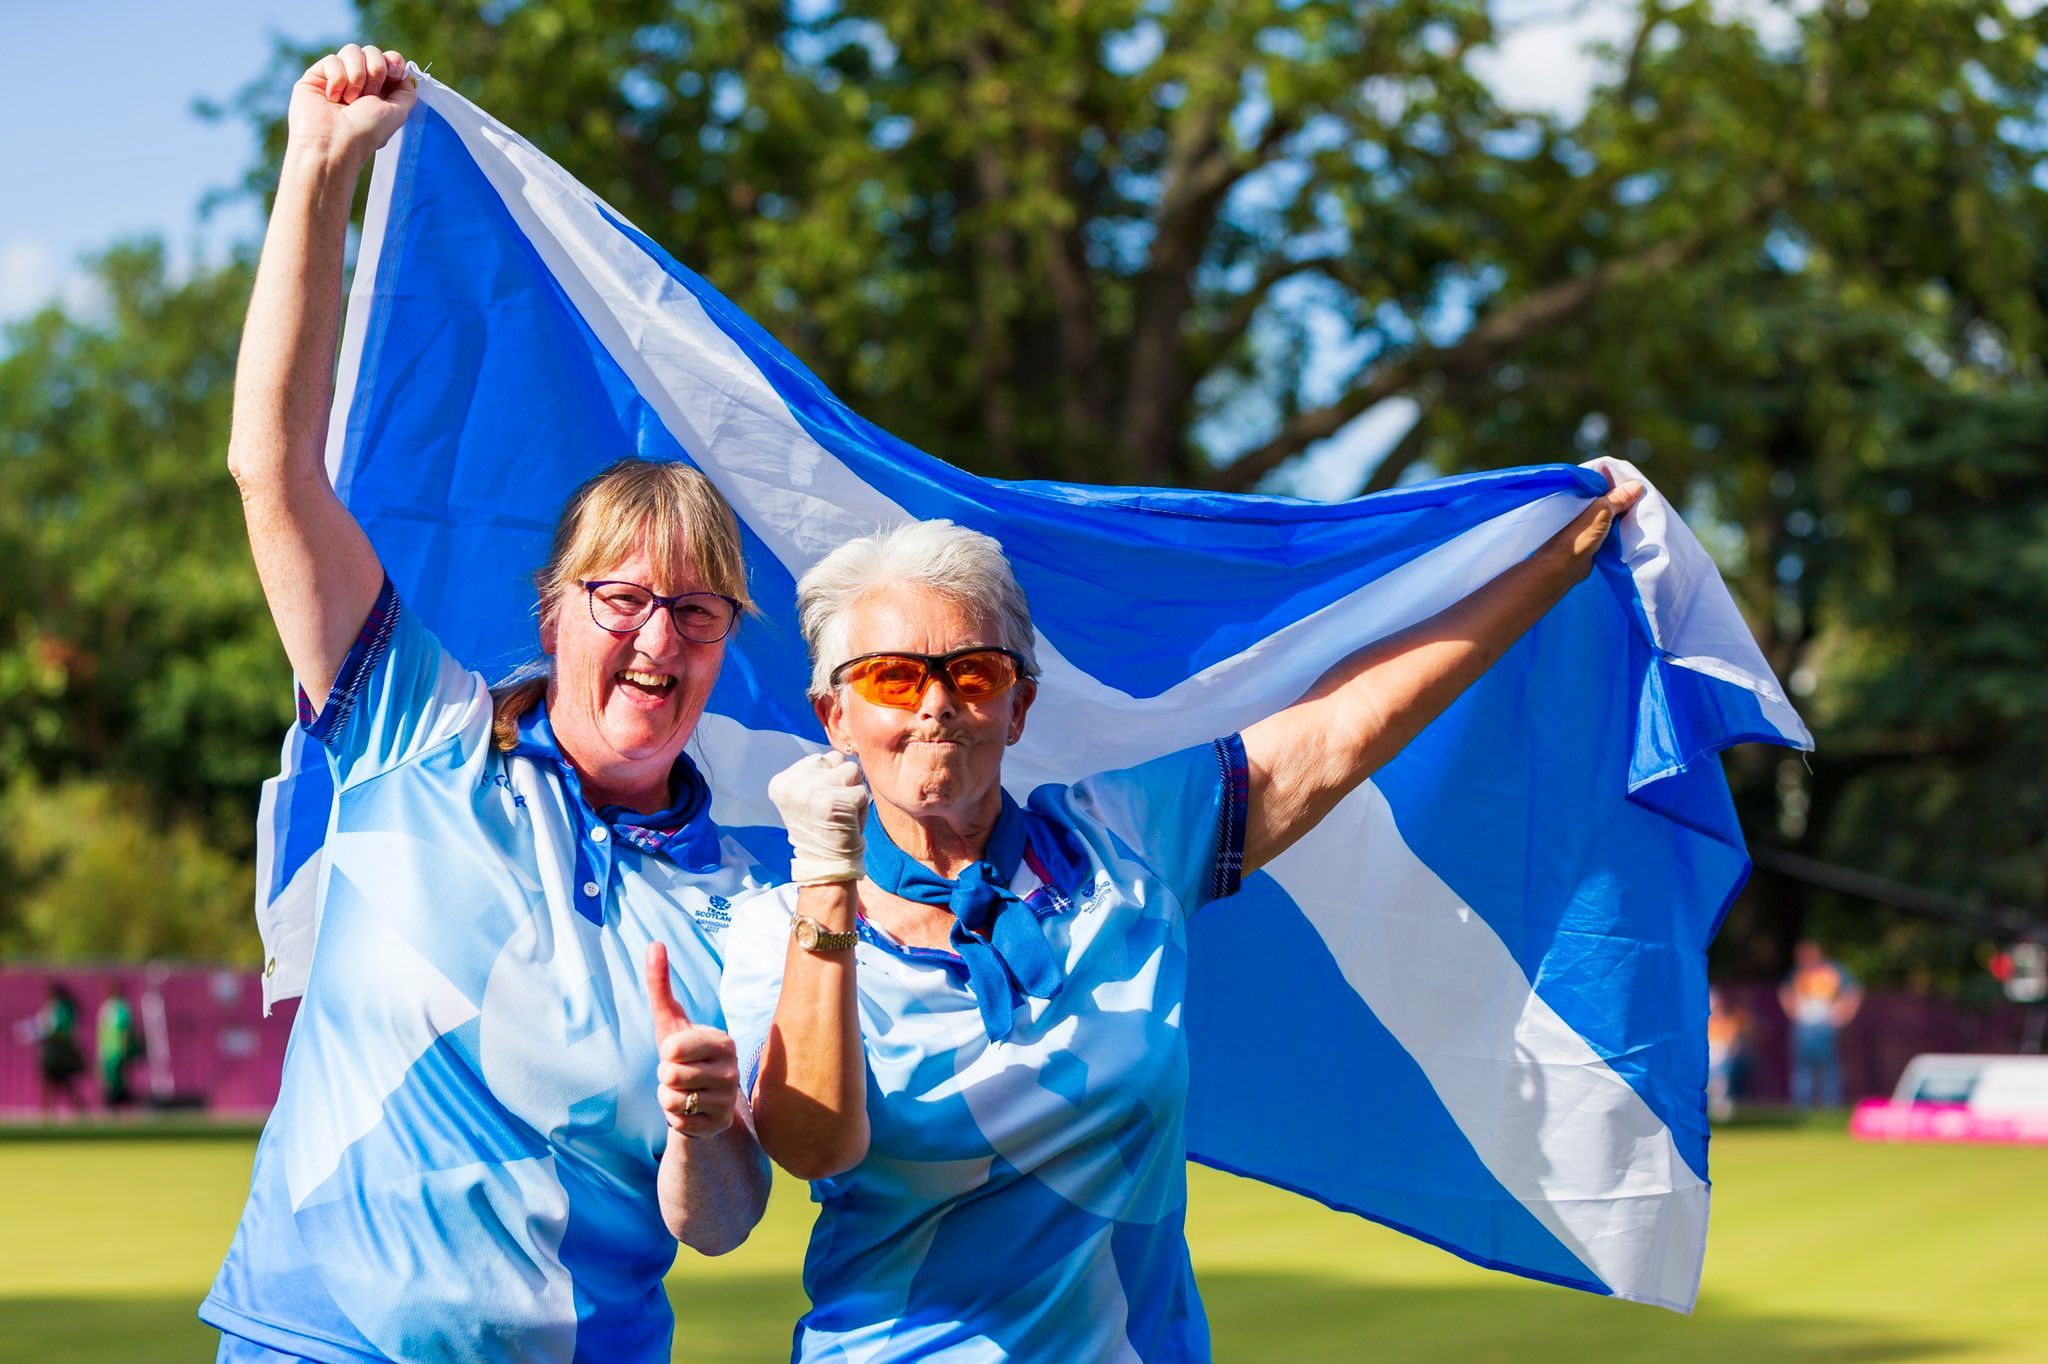 CWG 2022: Rosemary Lenton, 72, bags gold, becomes Scotland’s oldest medallist